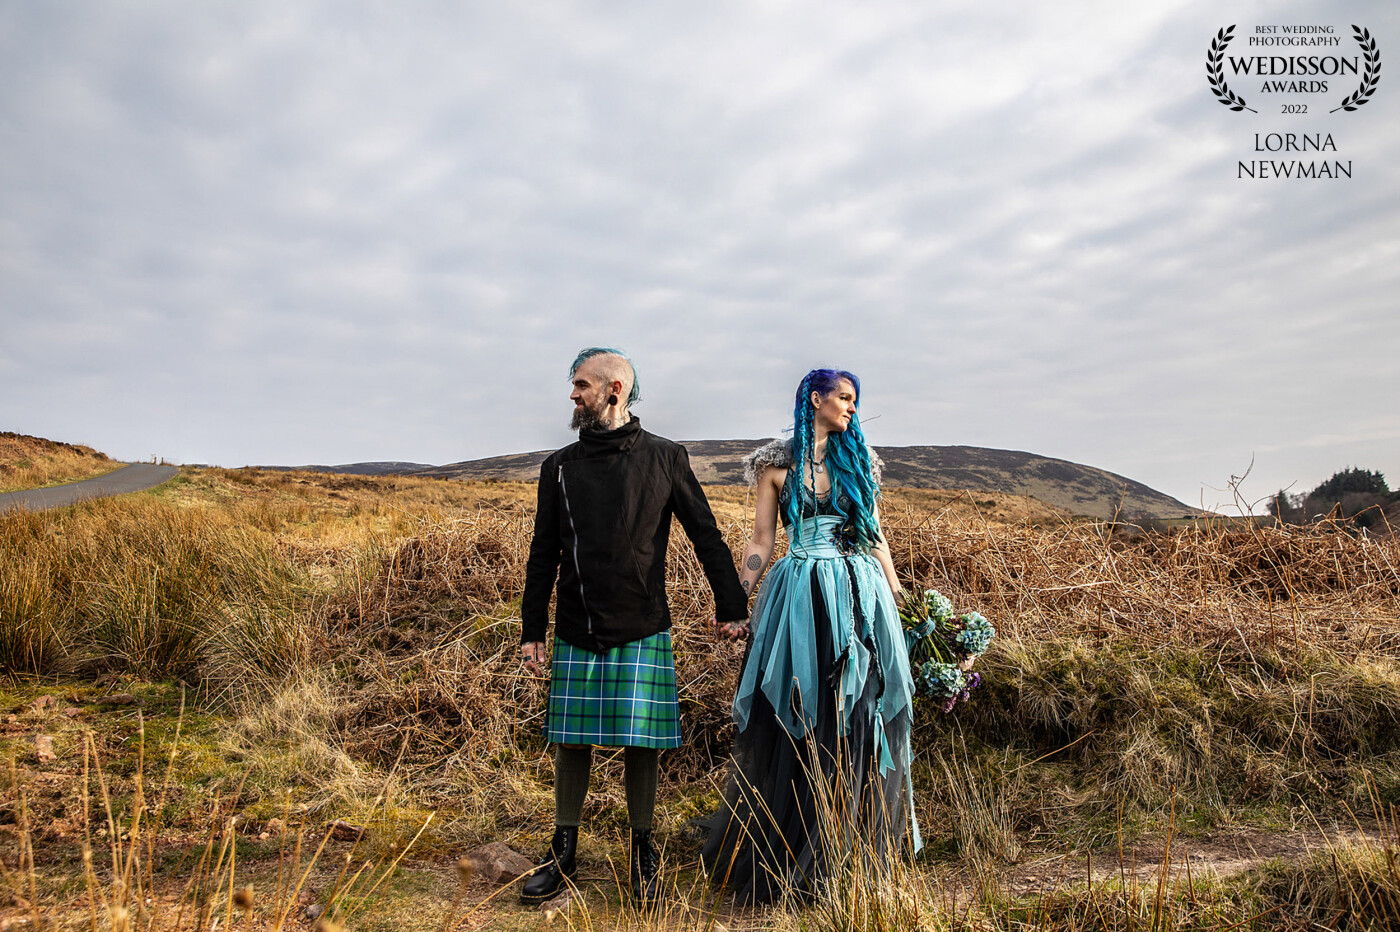 Louise & James had a beautiful gothic wedding ceremony in Scotland, all the details of this wedding was stunning and so unique. We head out to explore the beautiful Scottish landscape close to the Castle they got married in for their portrait session, it was the perfect backdrop.